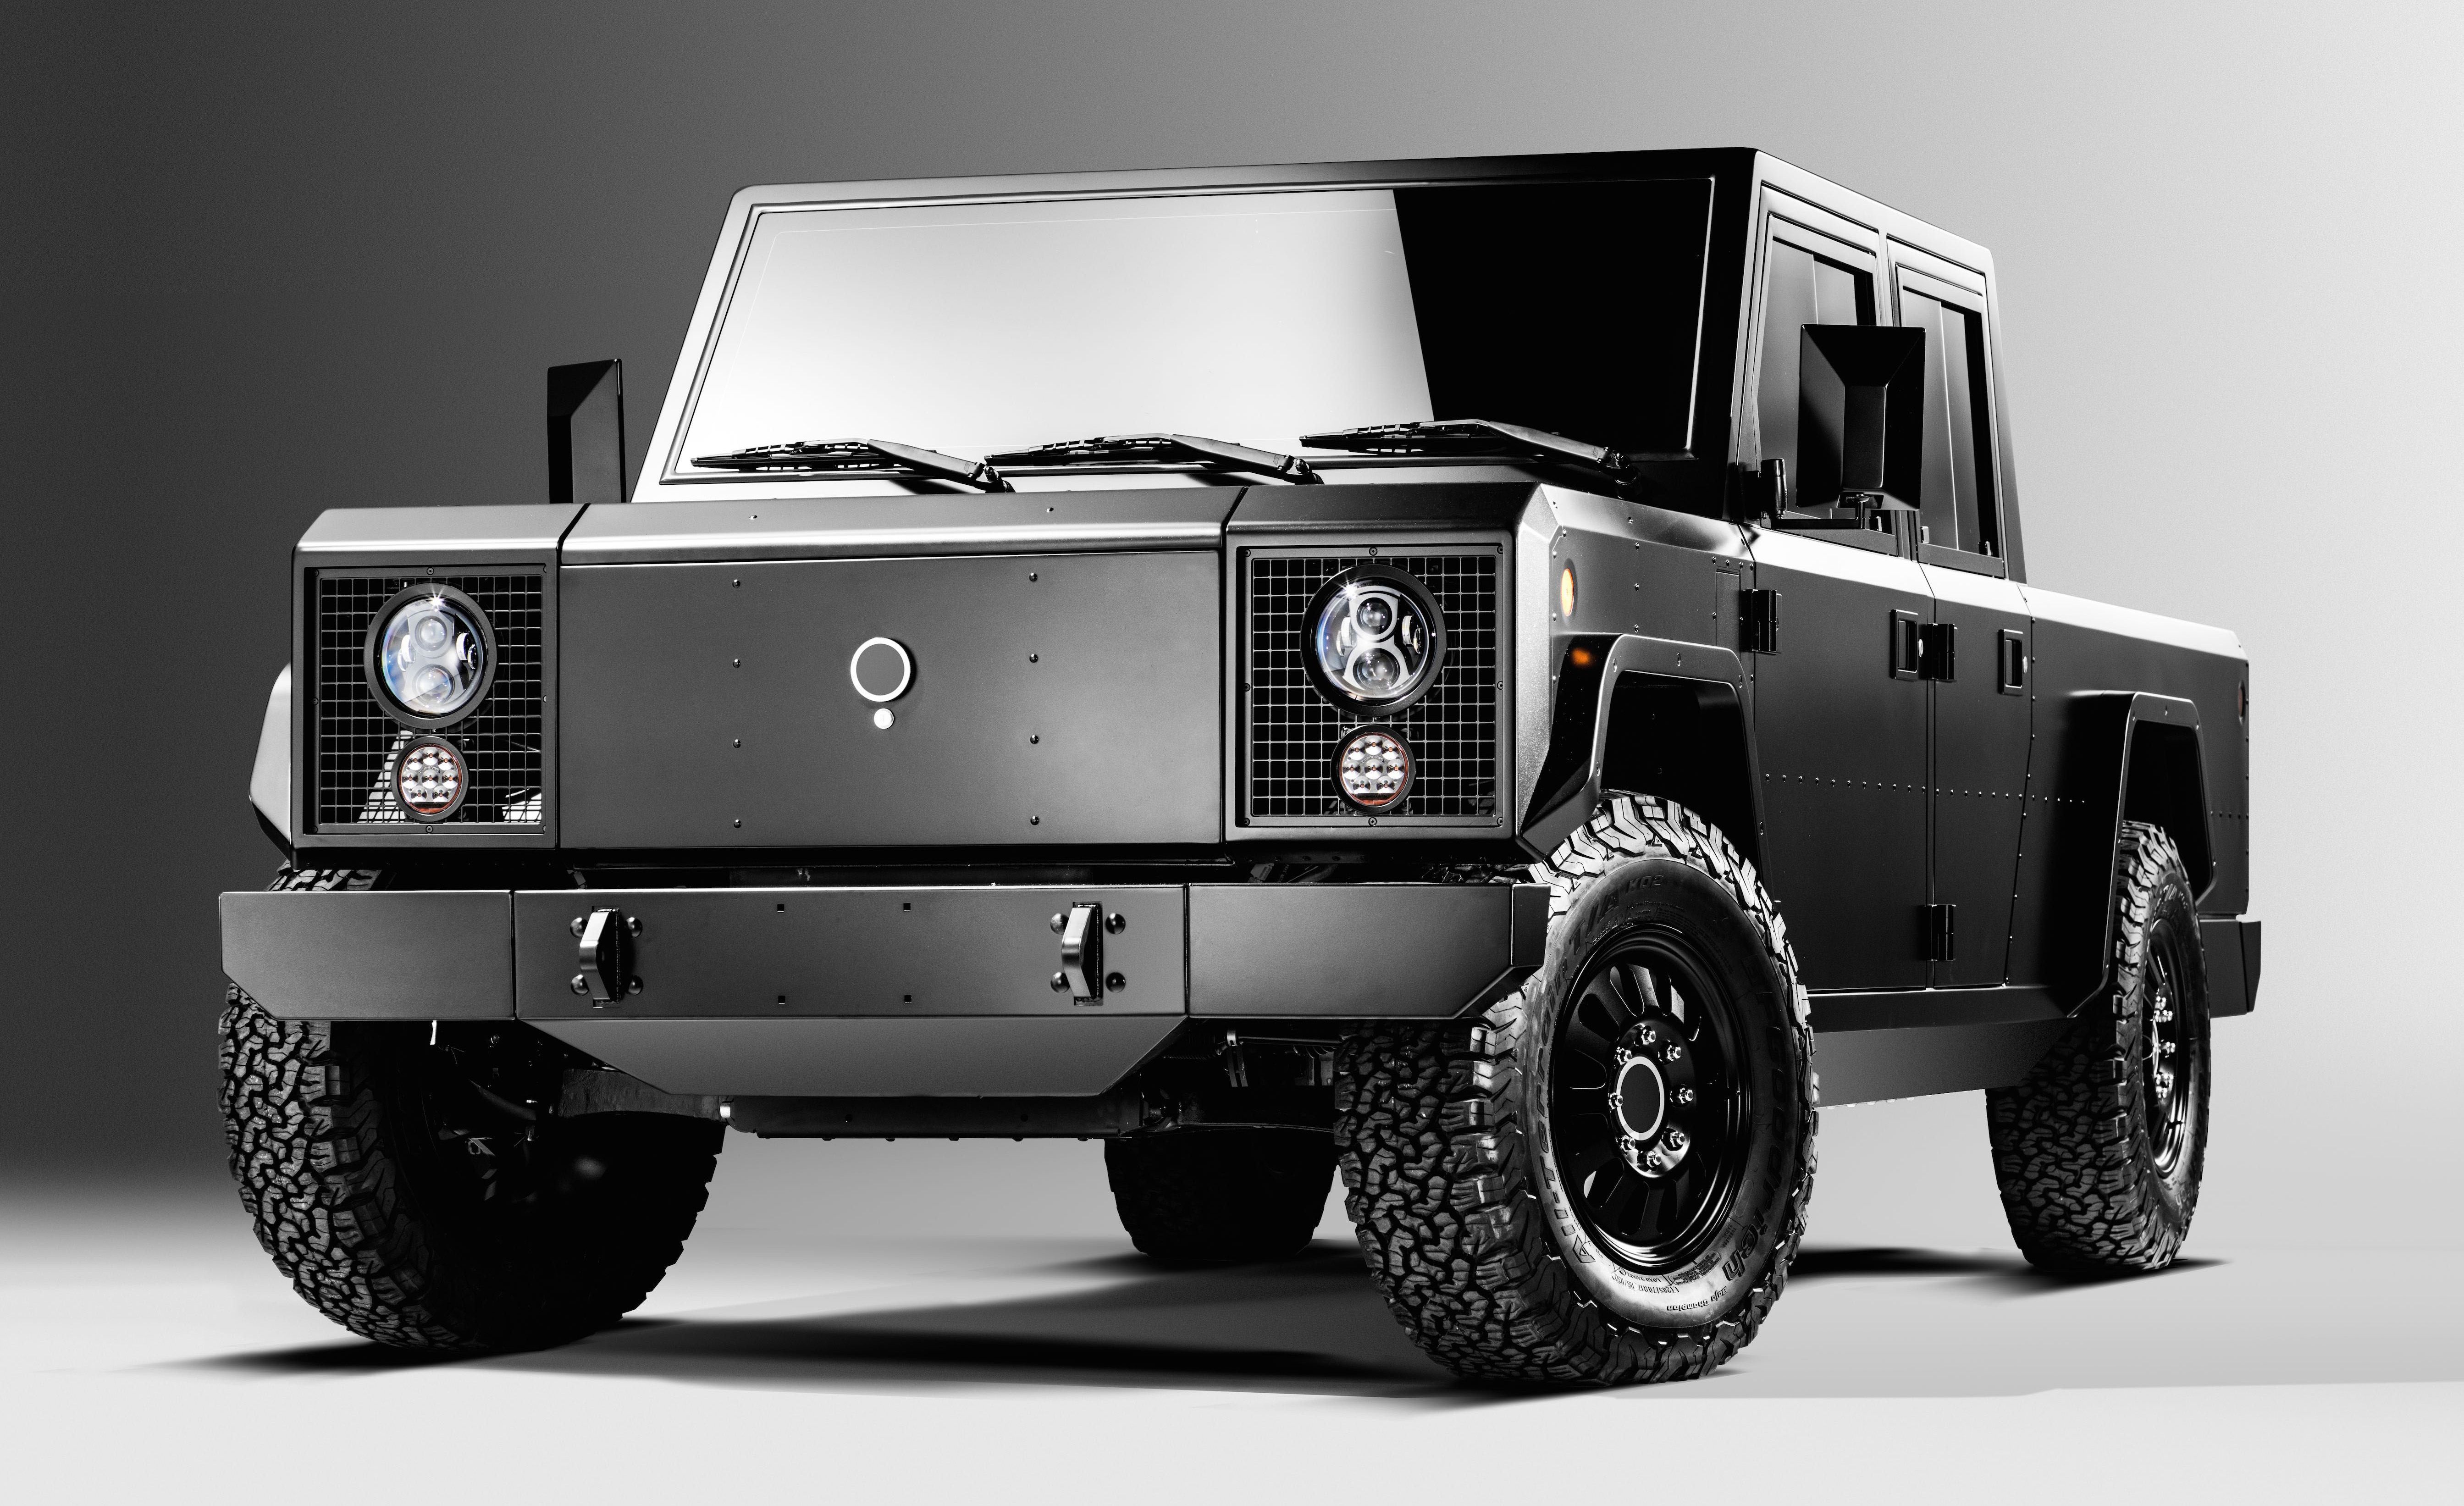 Bollinger Suspends Plans for Electric B1 SUV and B2 Pickup